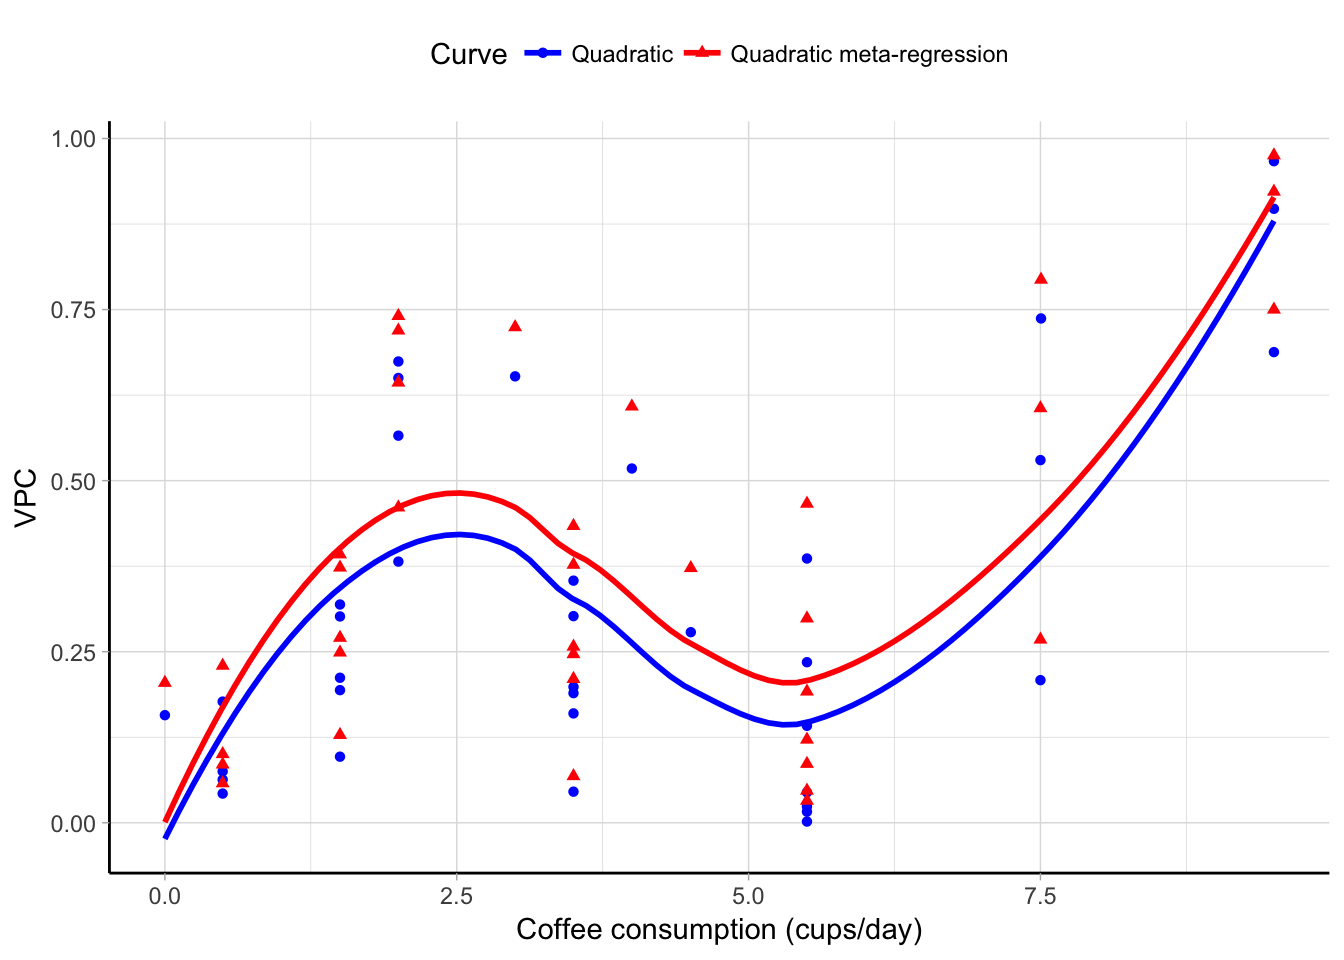 Variance Partition Coefficient, $\textrm{VPC}_{ij}$, versus observed dose levels plot and LOWESS smoother for dose--response meta-analysis between coffee consumption (cusp/day) and all-cause mortality using a quadratic and meta-regression model.